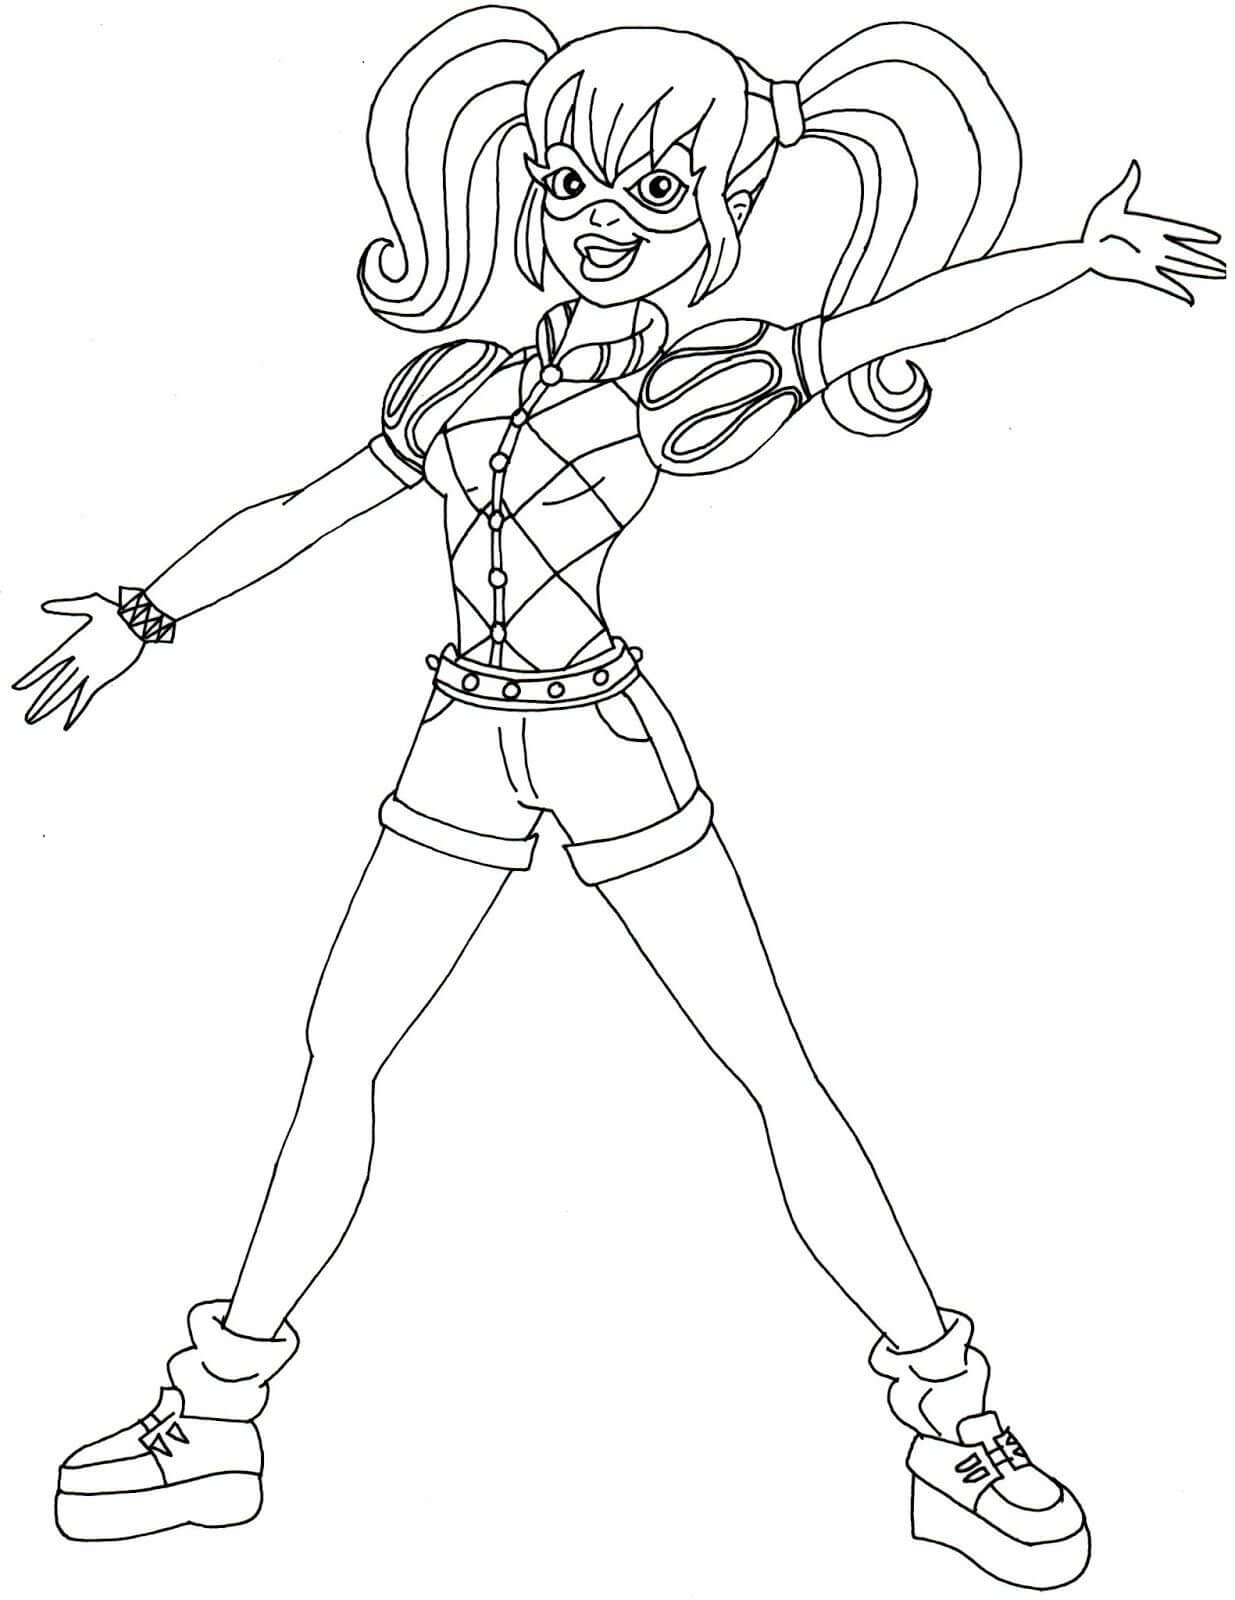 Harley Quinn from DC Super Hero Girls Coloring Page - Free Printable Coloring  Pages for Kids